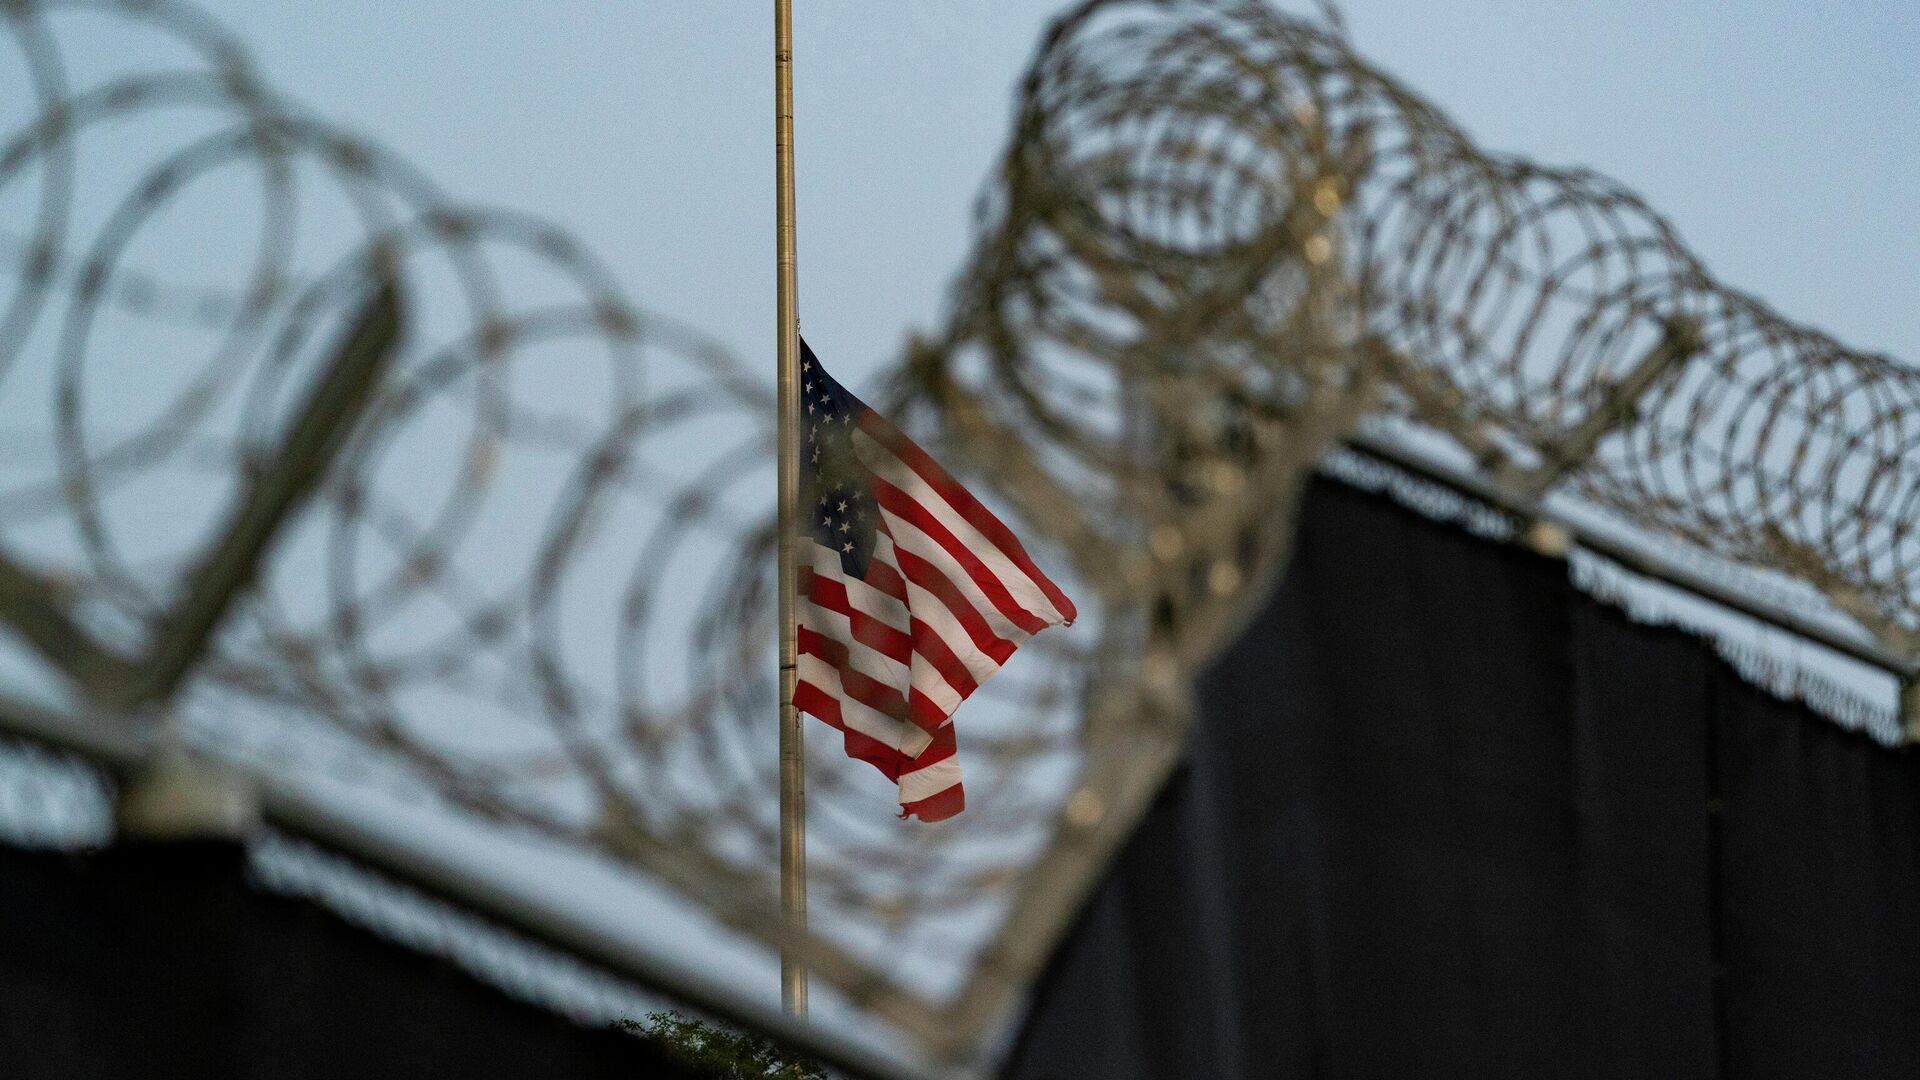 In this Aug. 29, 2021, file photo reviewed by U.S. military officials, a flag flies at half-staff in honor of the U.S. service members and other victims killed in the terrorist attack in Kabul, Afghanistan, as seen from Camp Justice in Guantanamo Bay Naval Base, Cuba. - Sputnik International, 1920, 12.01.2022